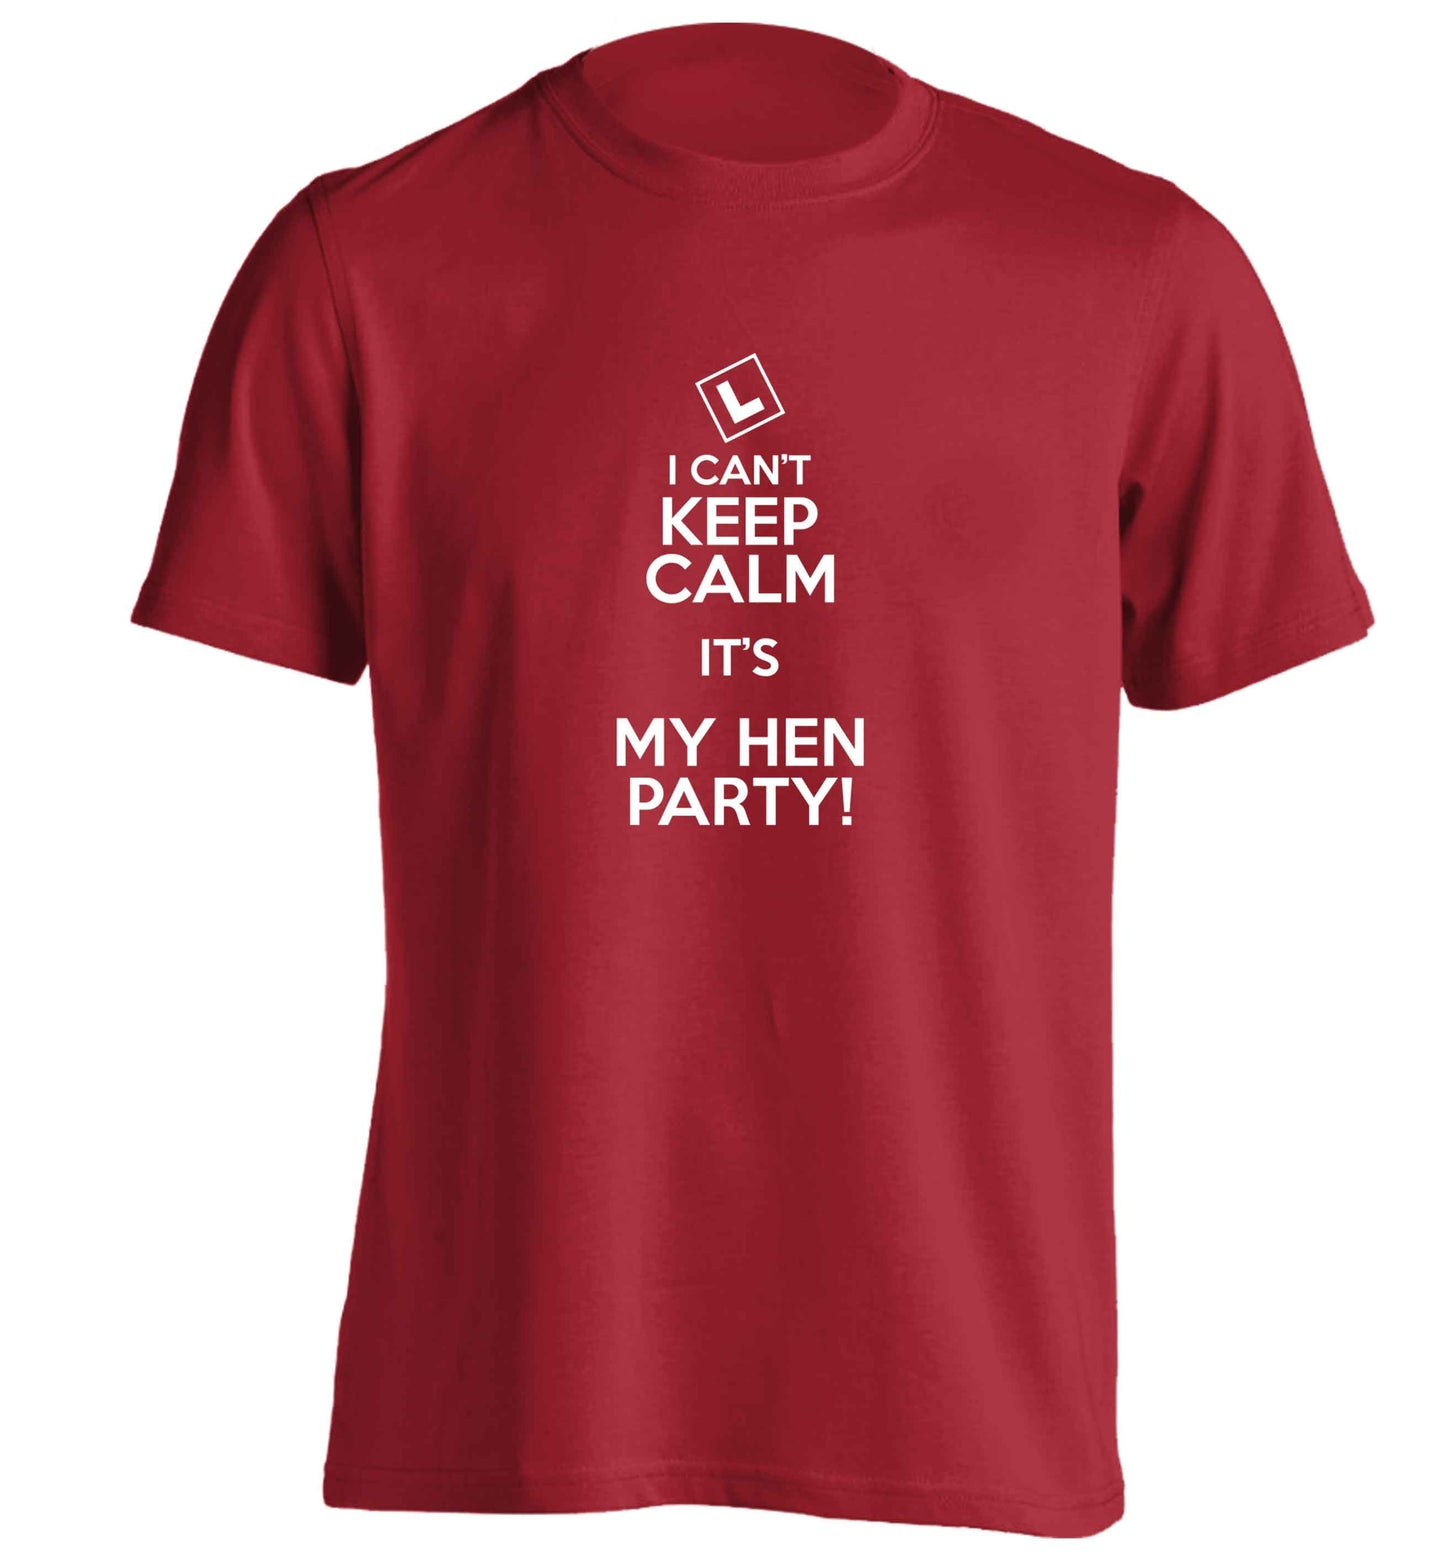 I can't keep calm it's my hen party adults unisex red Tshirt 2XL